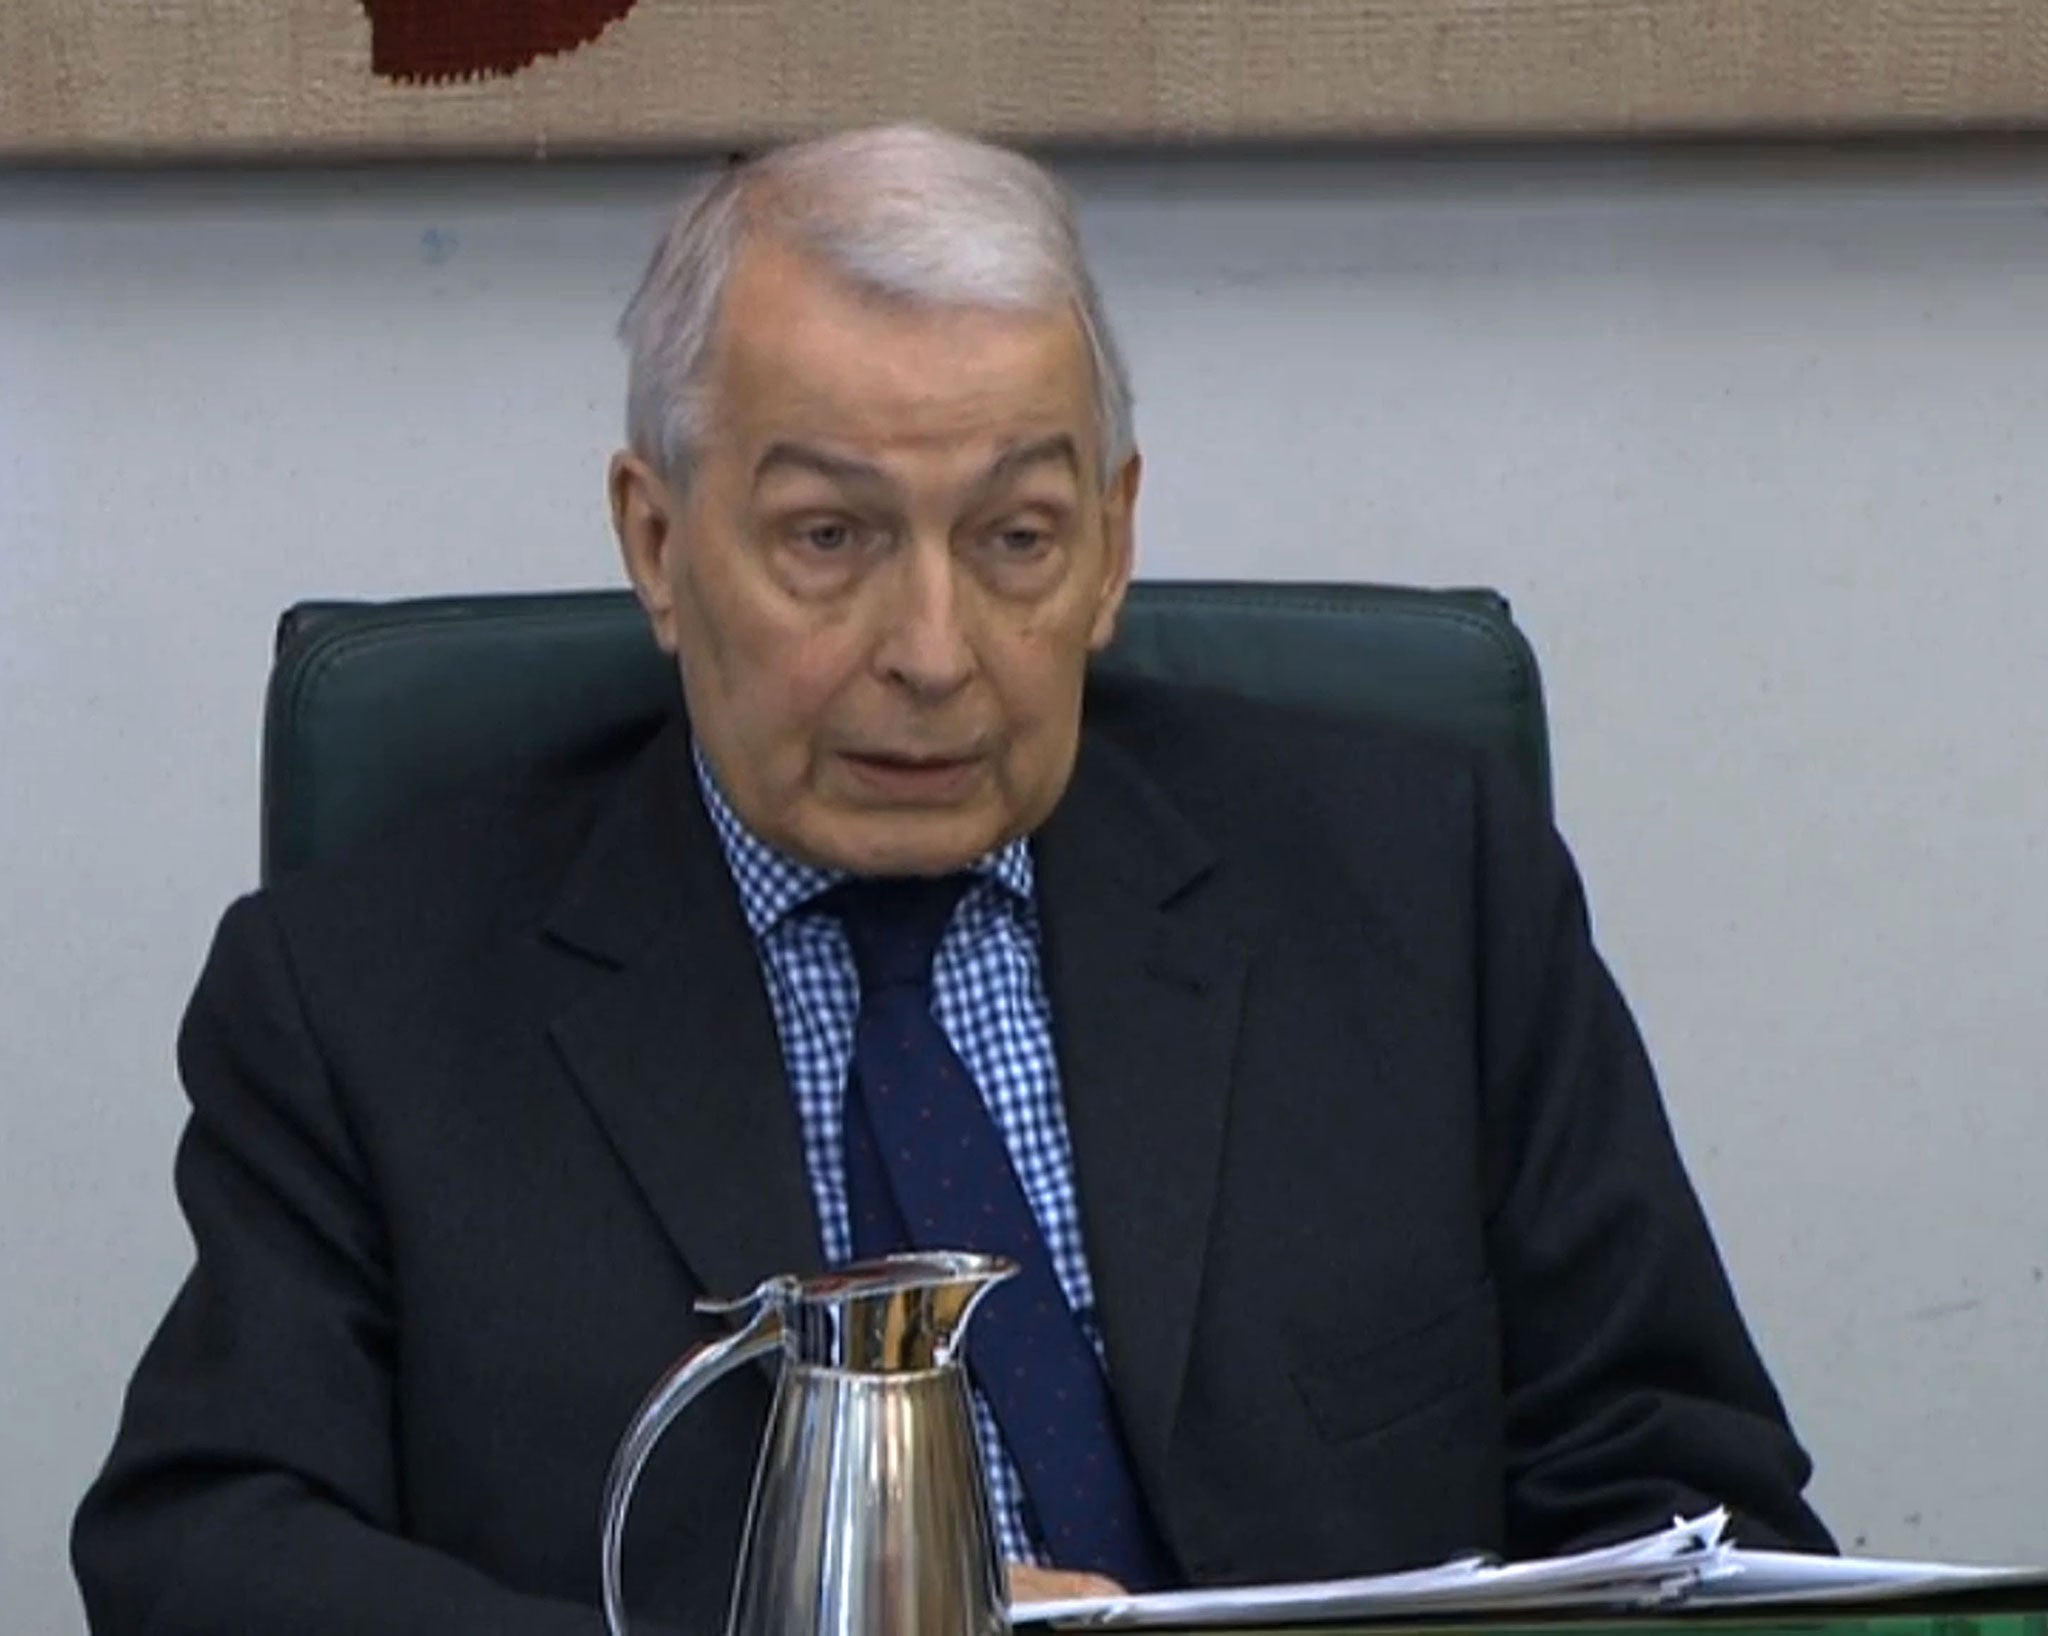 Frank Field has heavily criticised Hermes after employees allege the company paid less than minimum wage